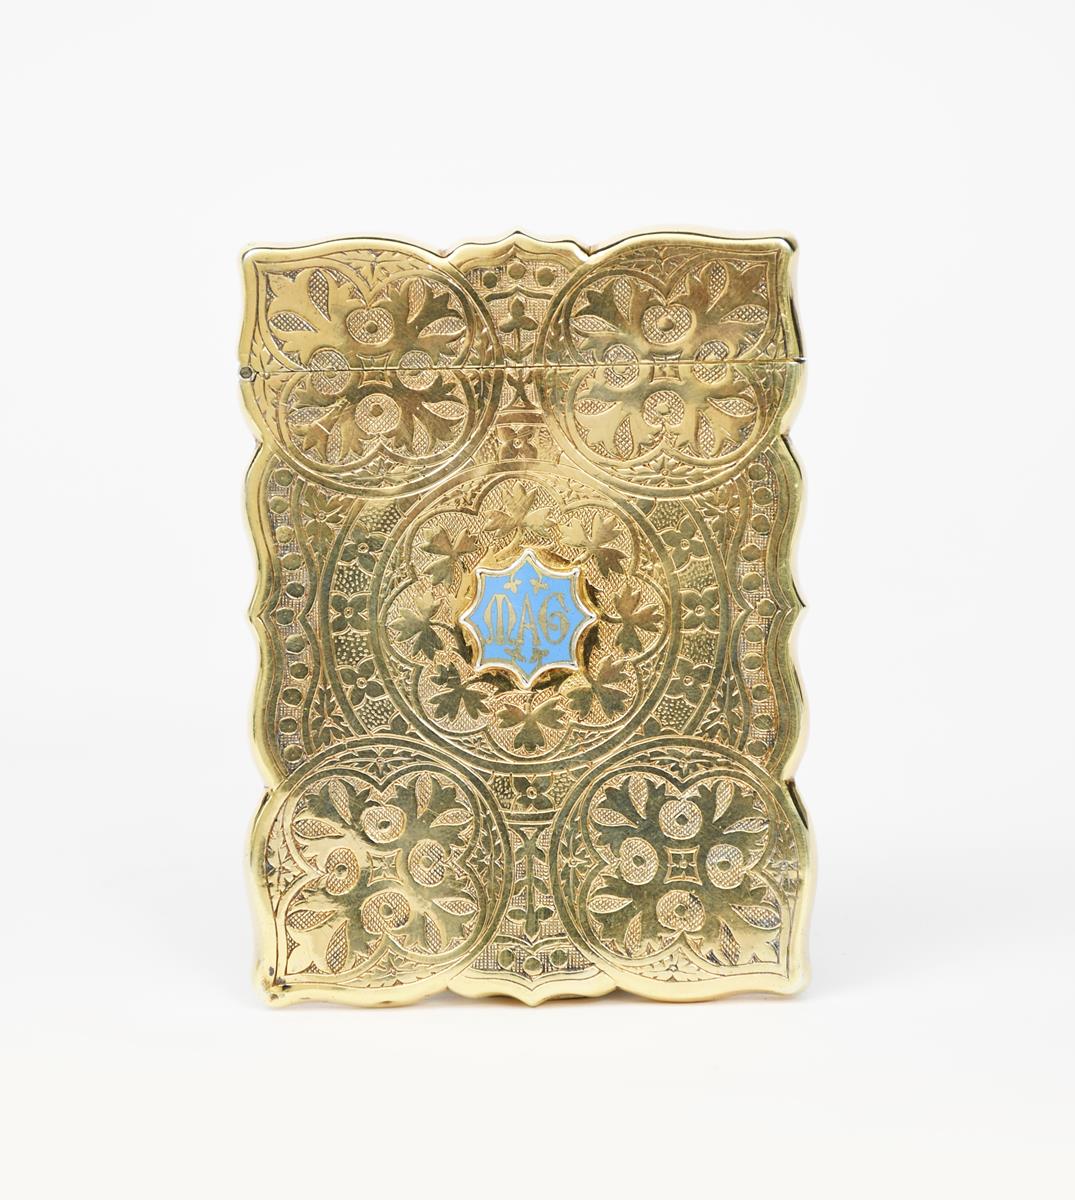 A Gothic Revival Hillard and Thomason silver gilt and enamel card case, dated 1851, shaped - Image 2 of 2